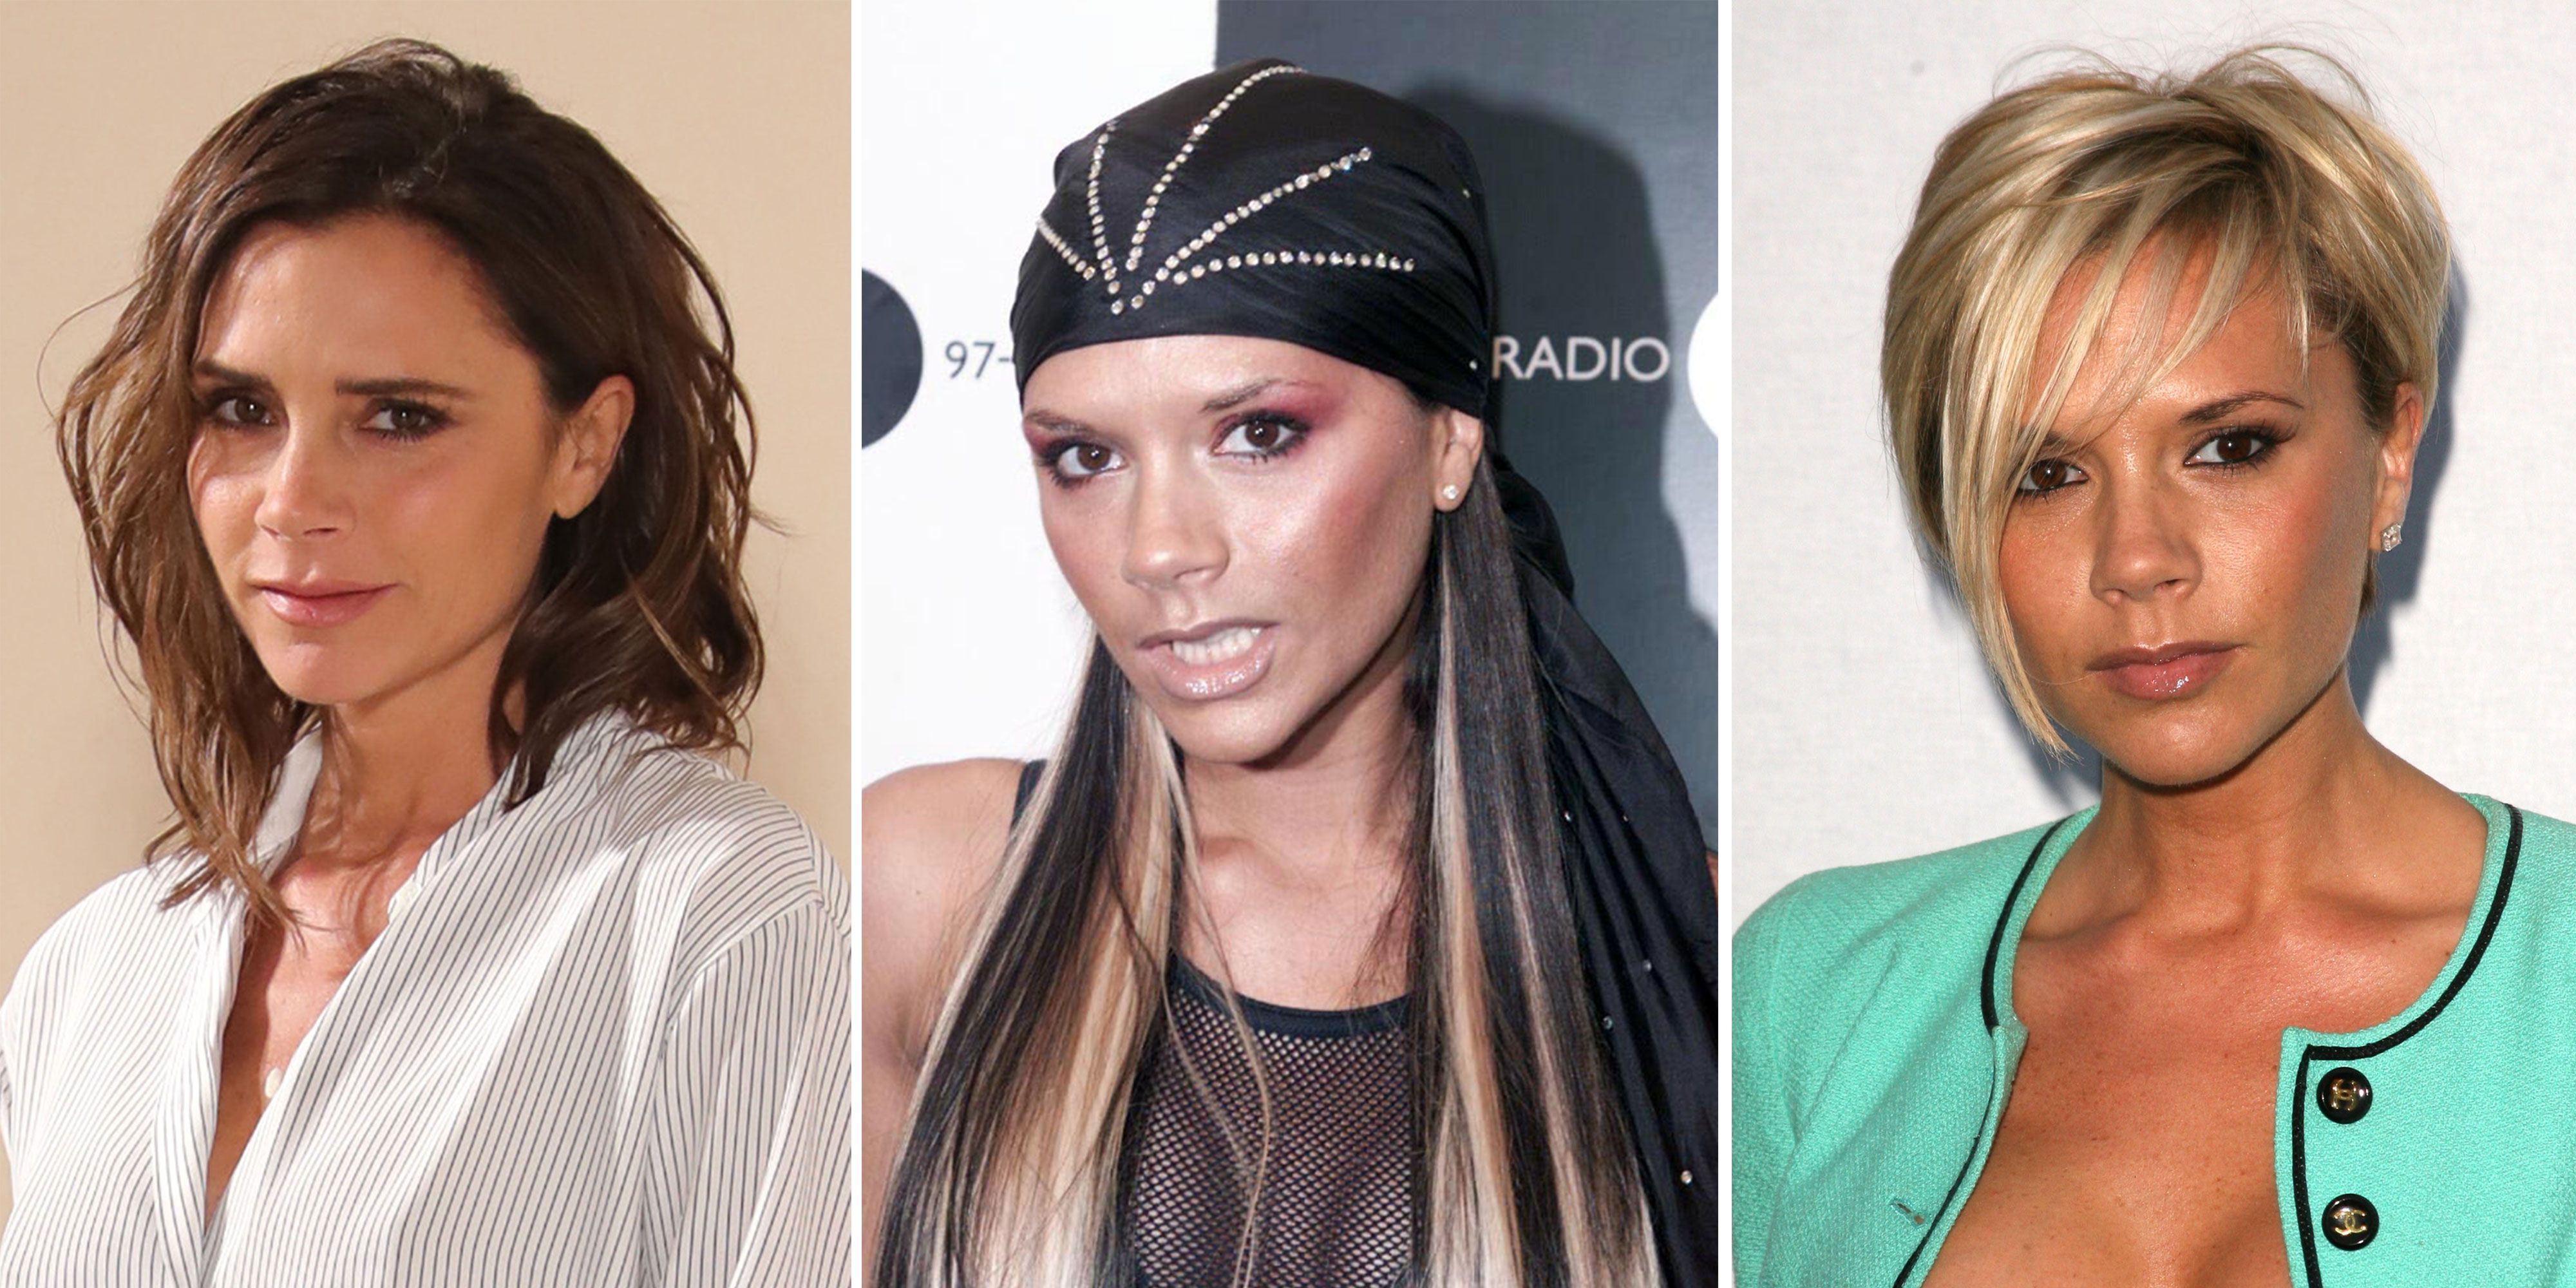 Victoria Beckham's beauty transformation over the years